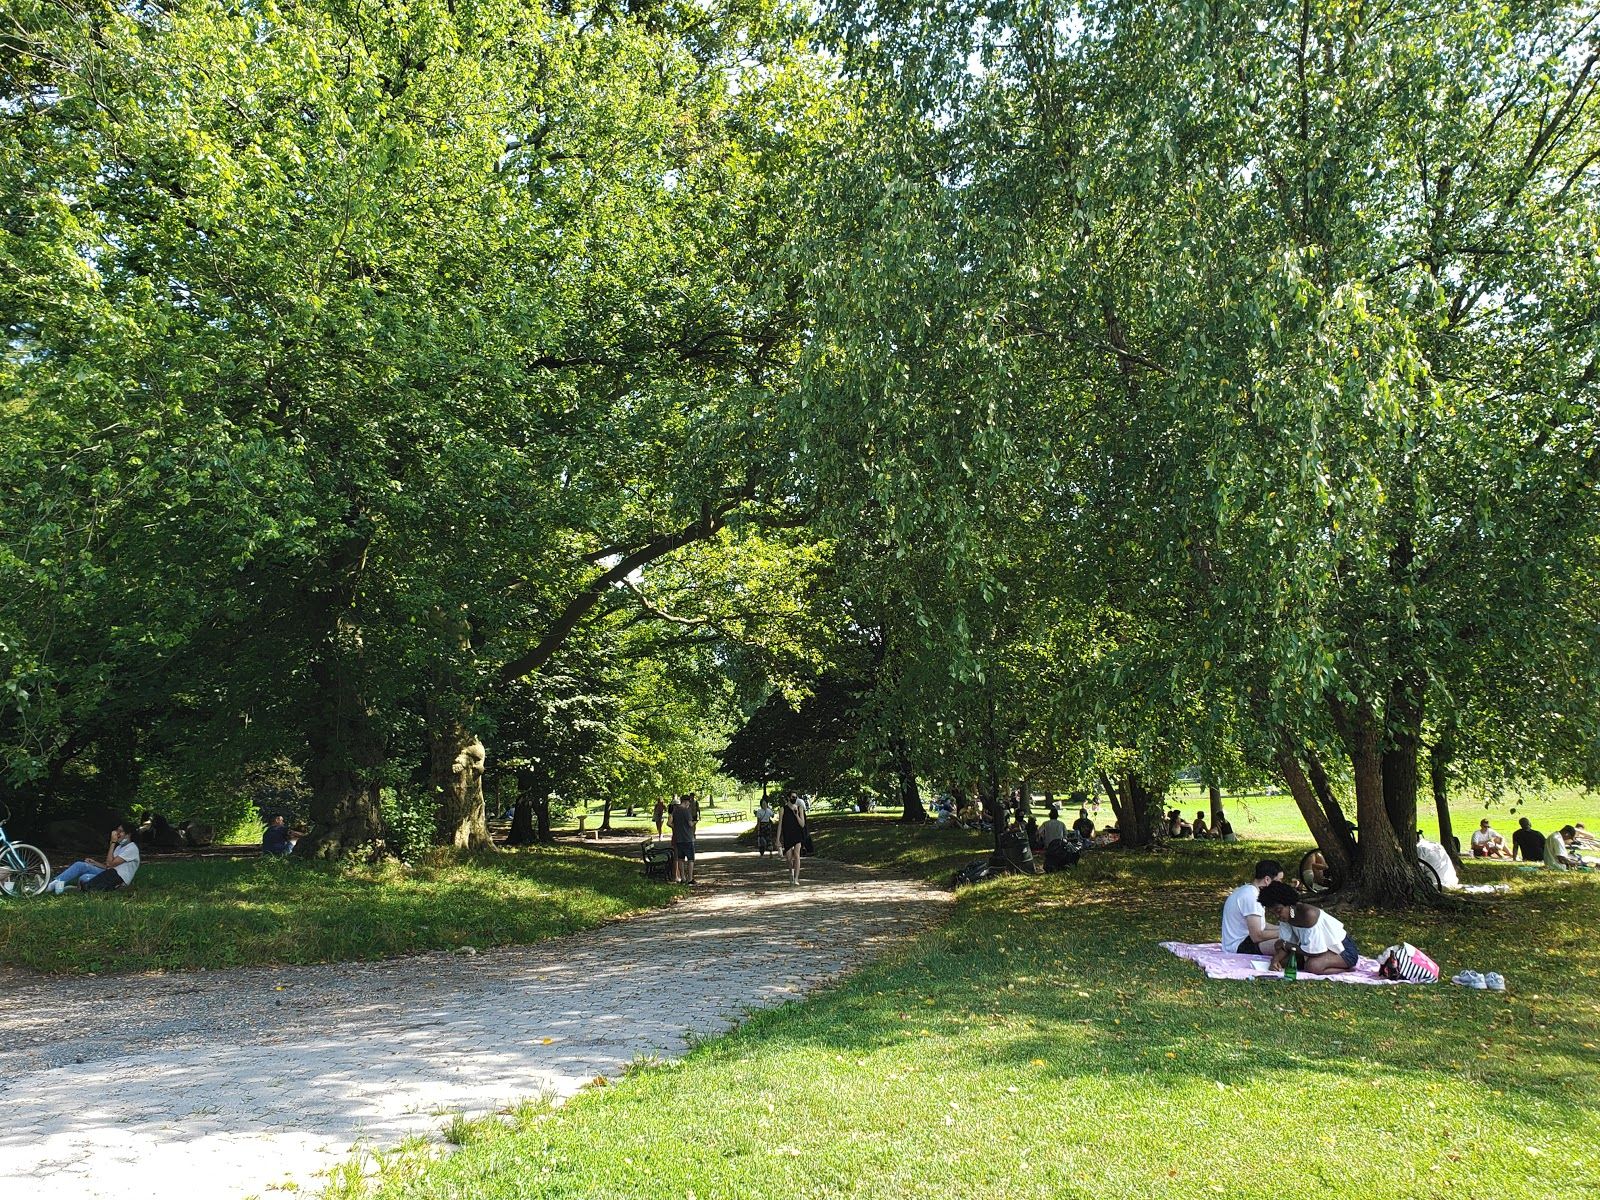 Passing time under trees in Prospect Park. Image by Clarisa Diaz. United States, 2020.
